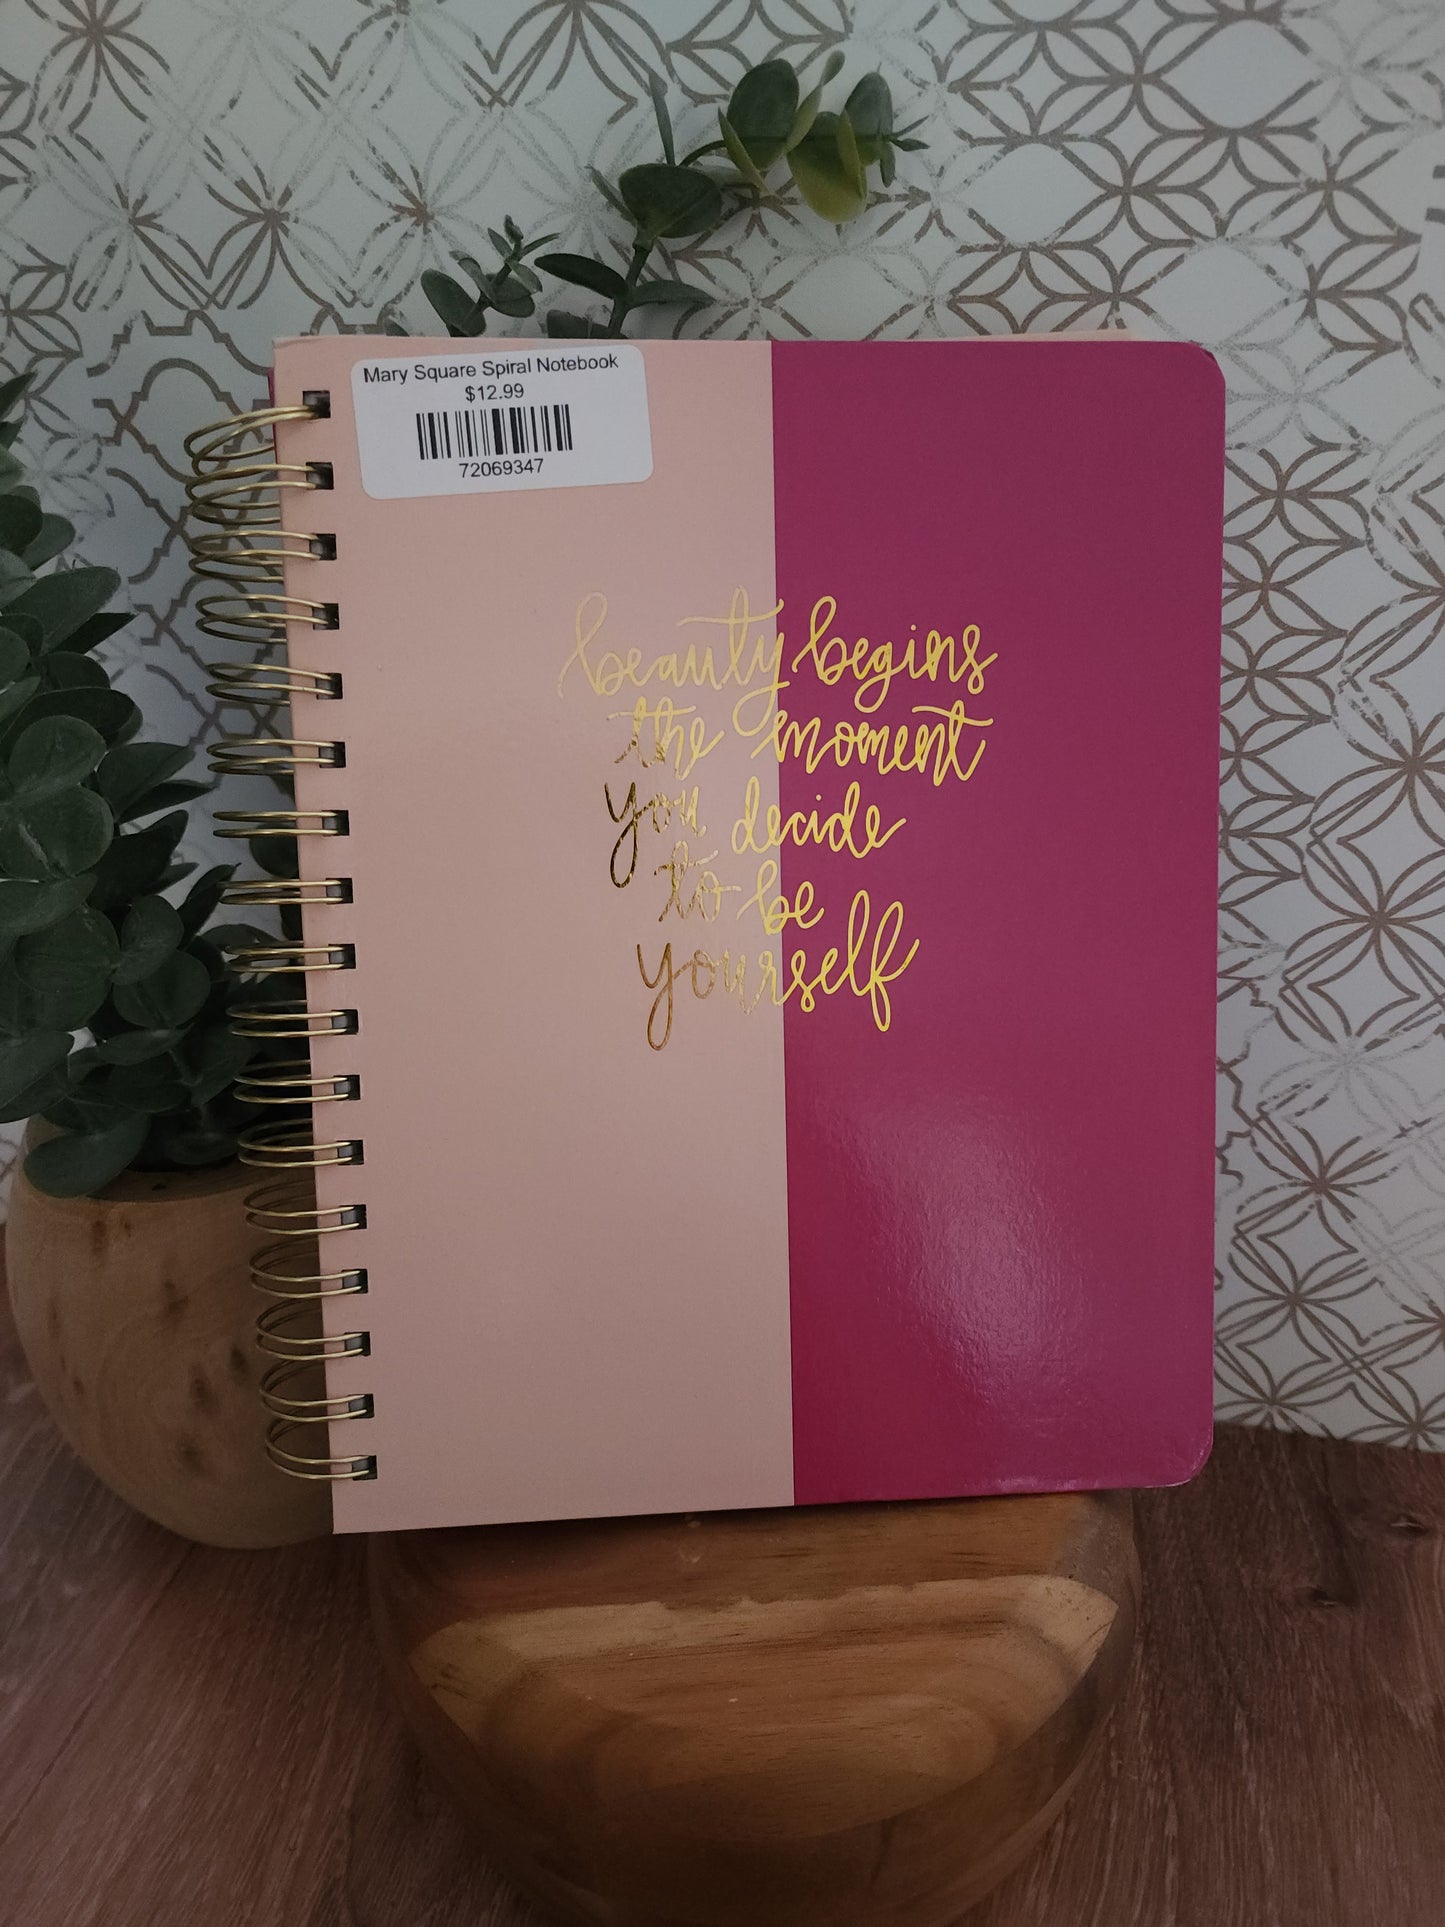 Mary Square Spiral Notebook